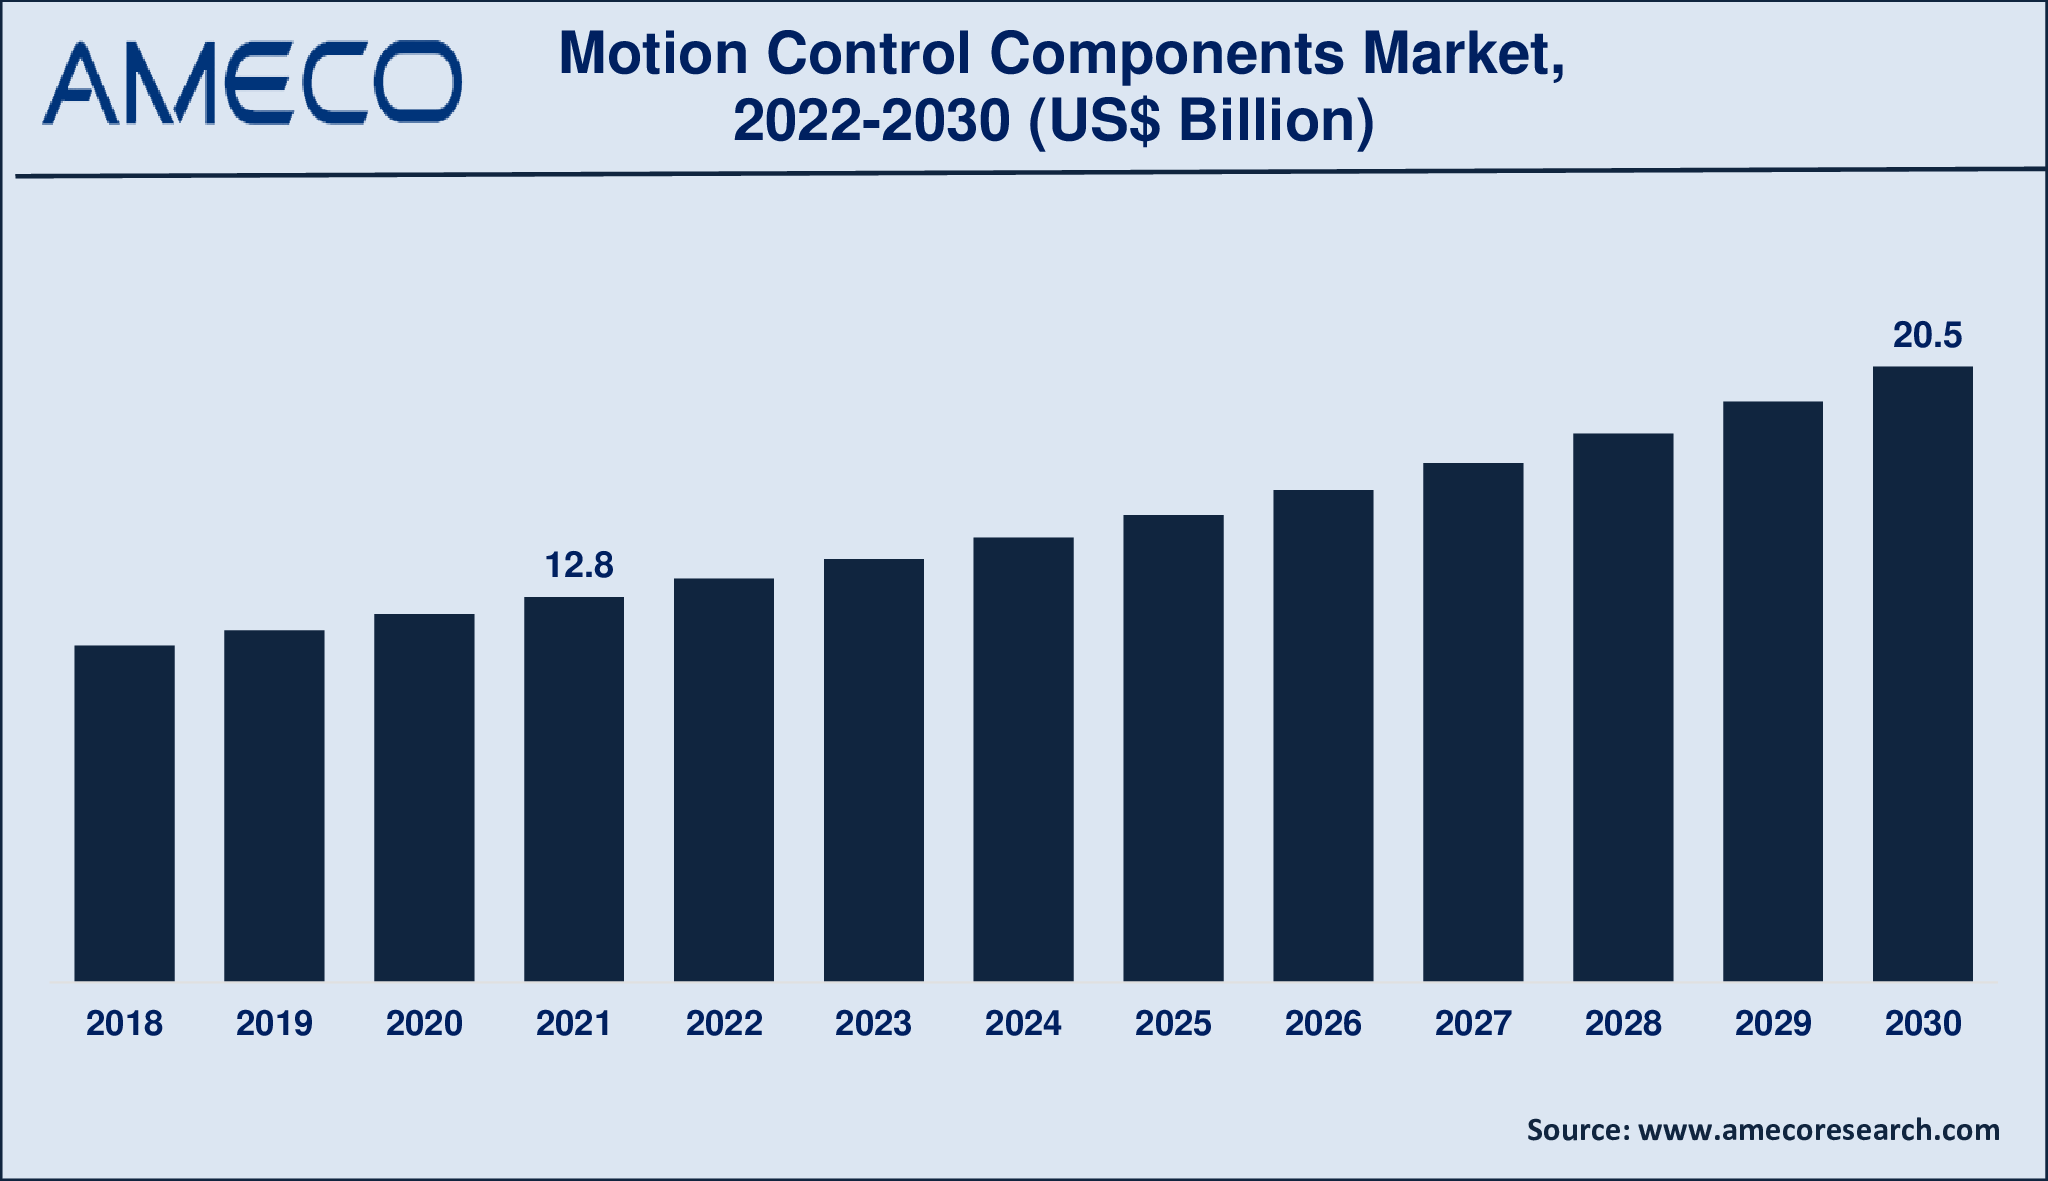 Motion Control Components Market Size, Share, Growth, Trends, and Forecast 2022-2030